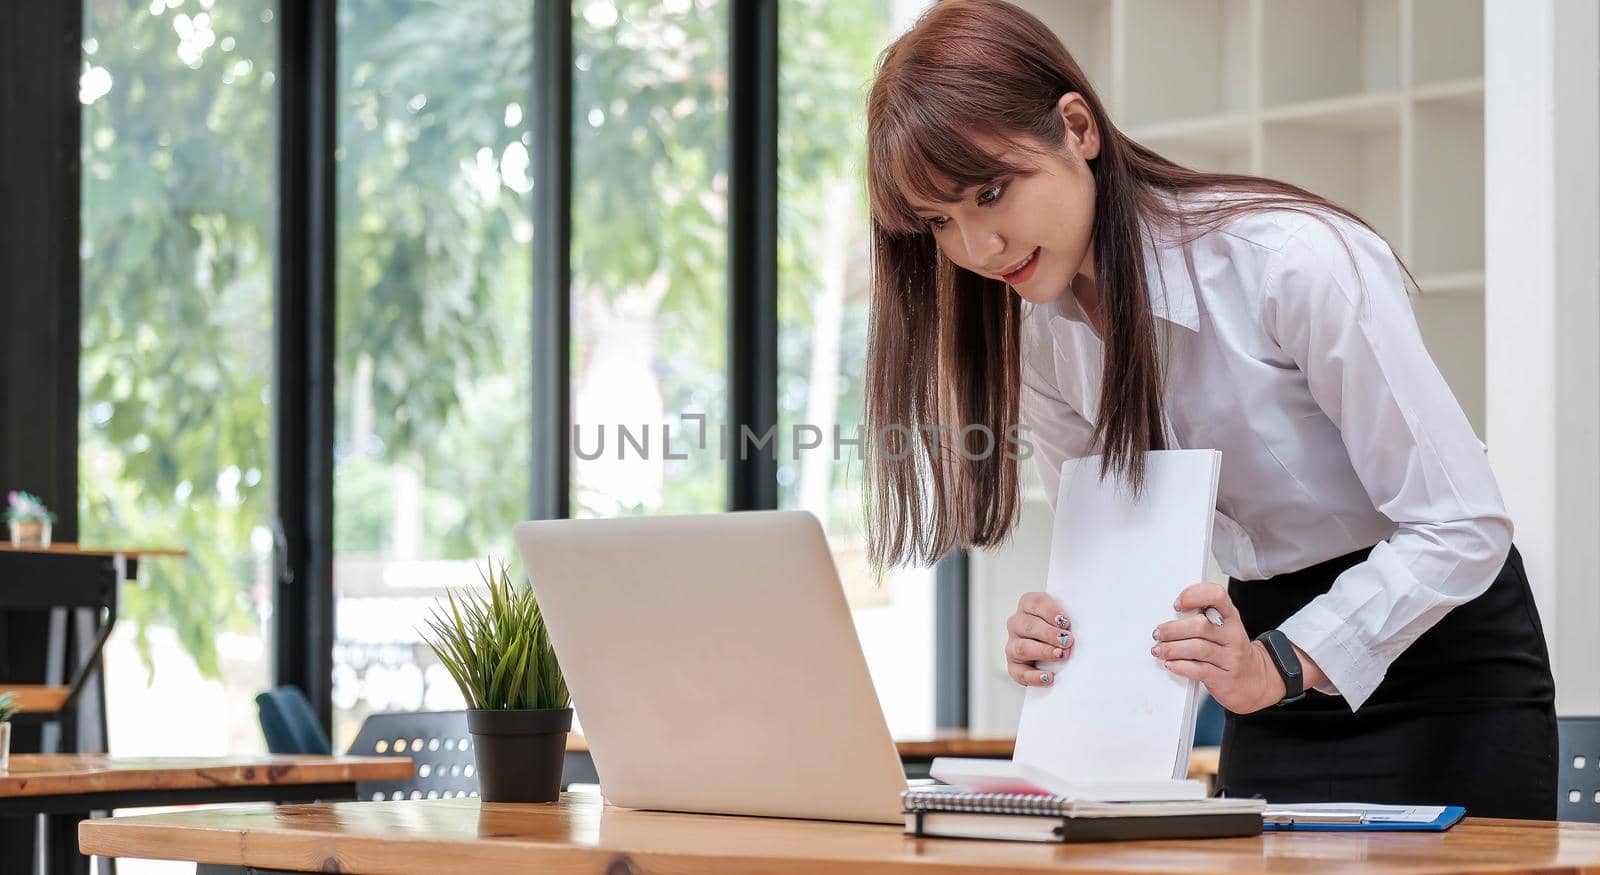 Smart businesswoman analyzing business data, reviewing profits report and working on laptop computer with calculator on desk in office, startup business, business strategy analysis concept, close up.